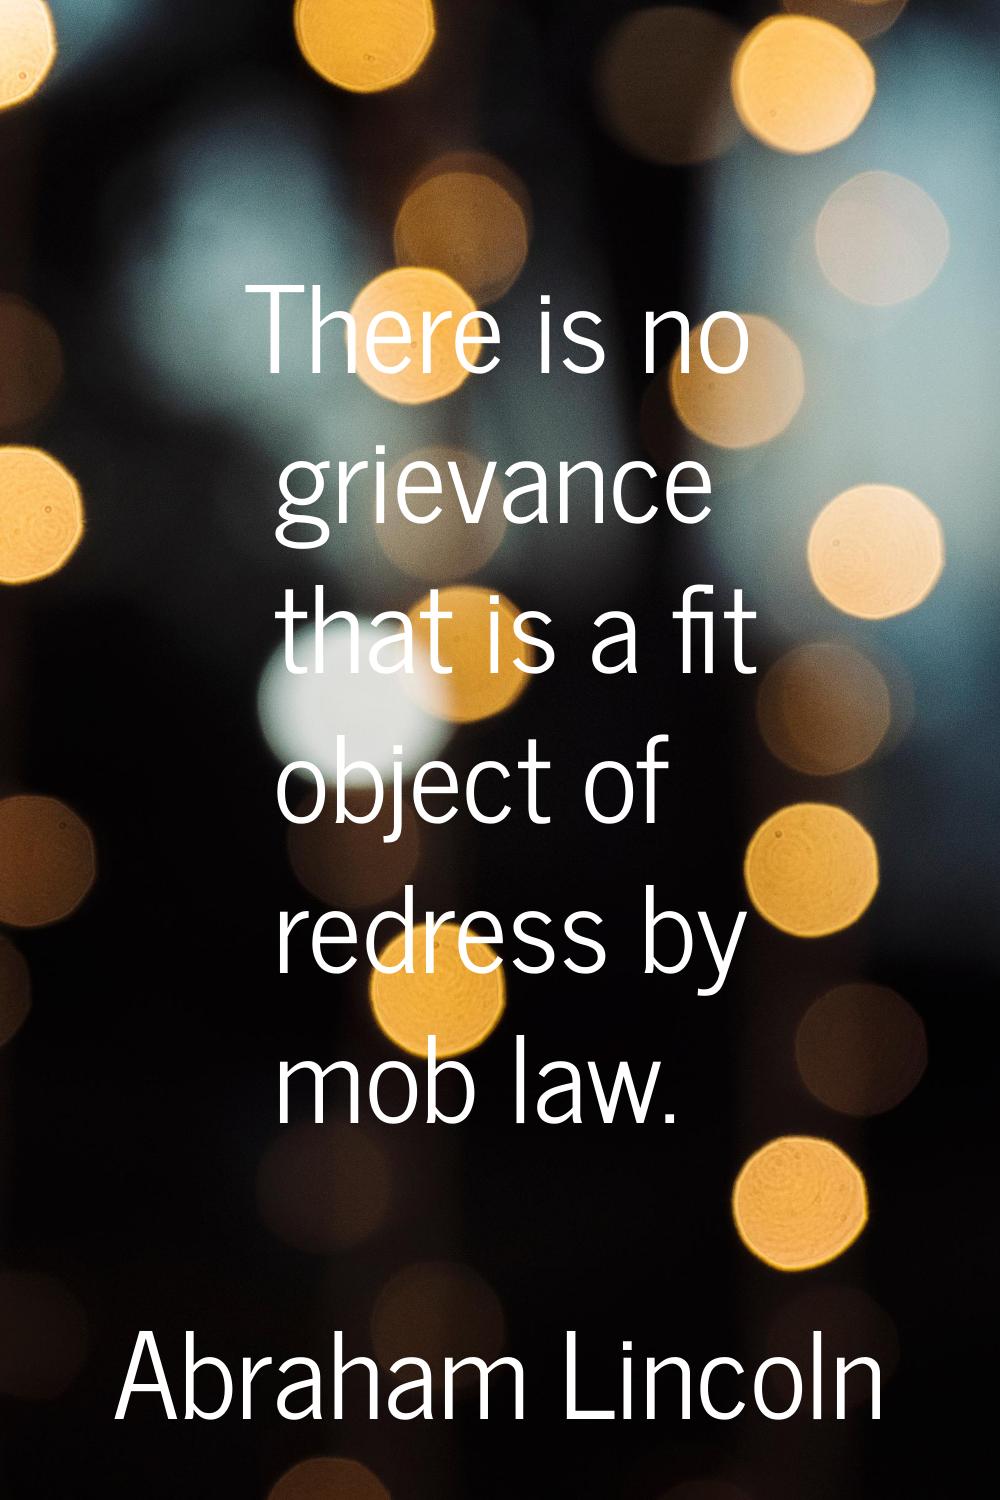 There is no grievance that is a fit object of redress by mob law.